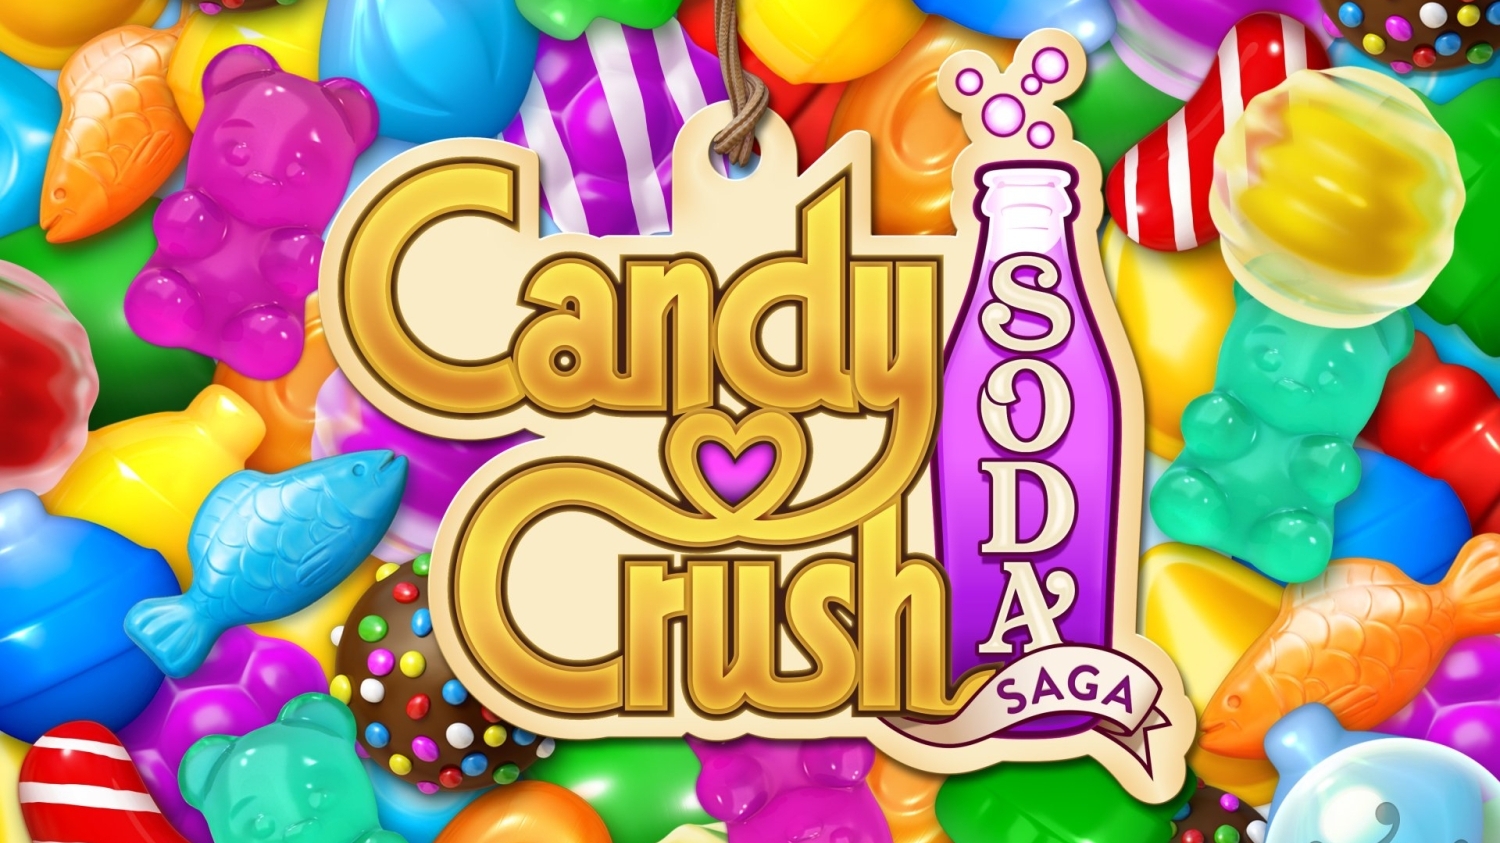 How King and its Candy Crush IP will help Microsoft boost its